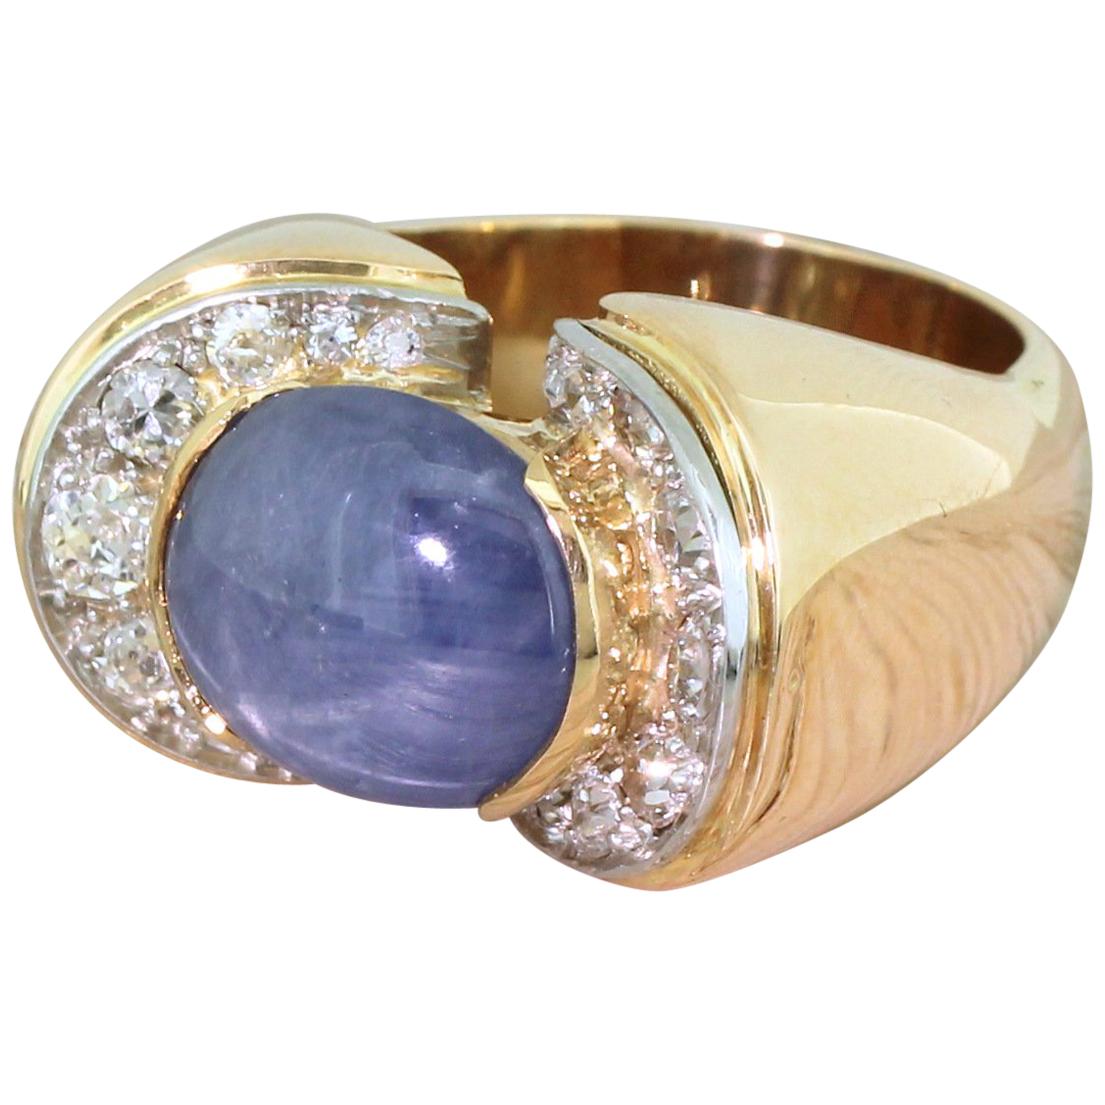 Retro 11.00 Carat Star Sapphire and 1.04 Carat Old Cut Diamond Ring For Sale